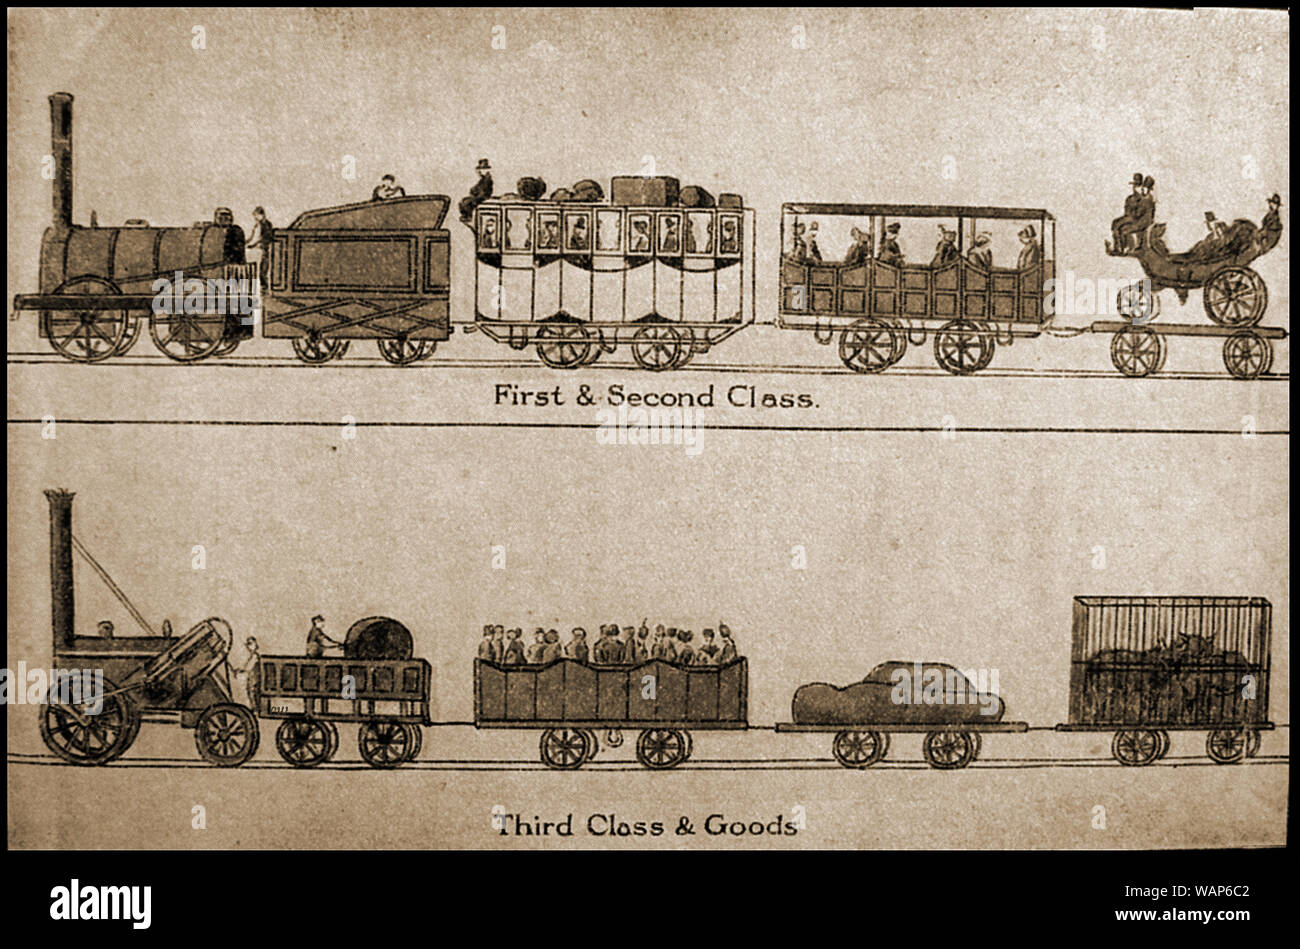 A lovely illustration of the classes available for steam train travel in the Victorian era    -1st class - 2nd class - 3rd class - Goods Class Stock Photo